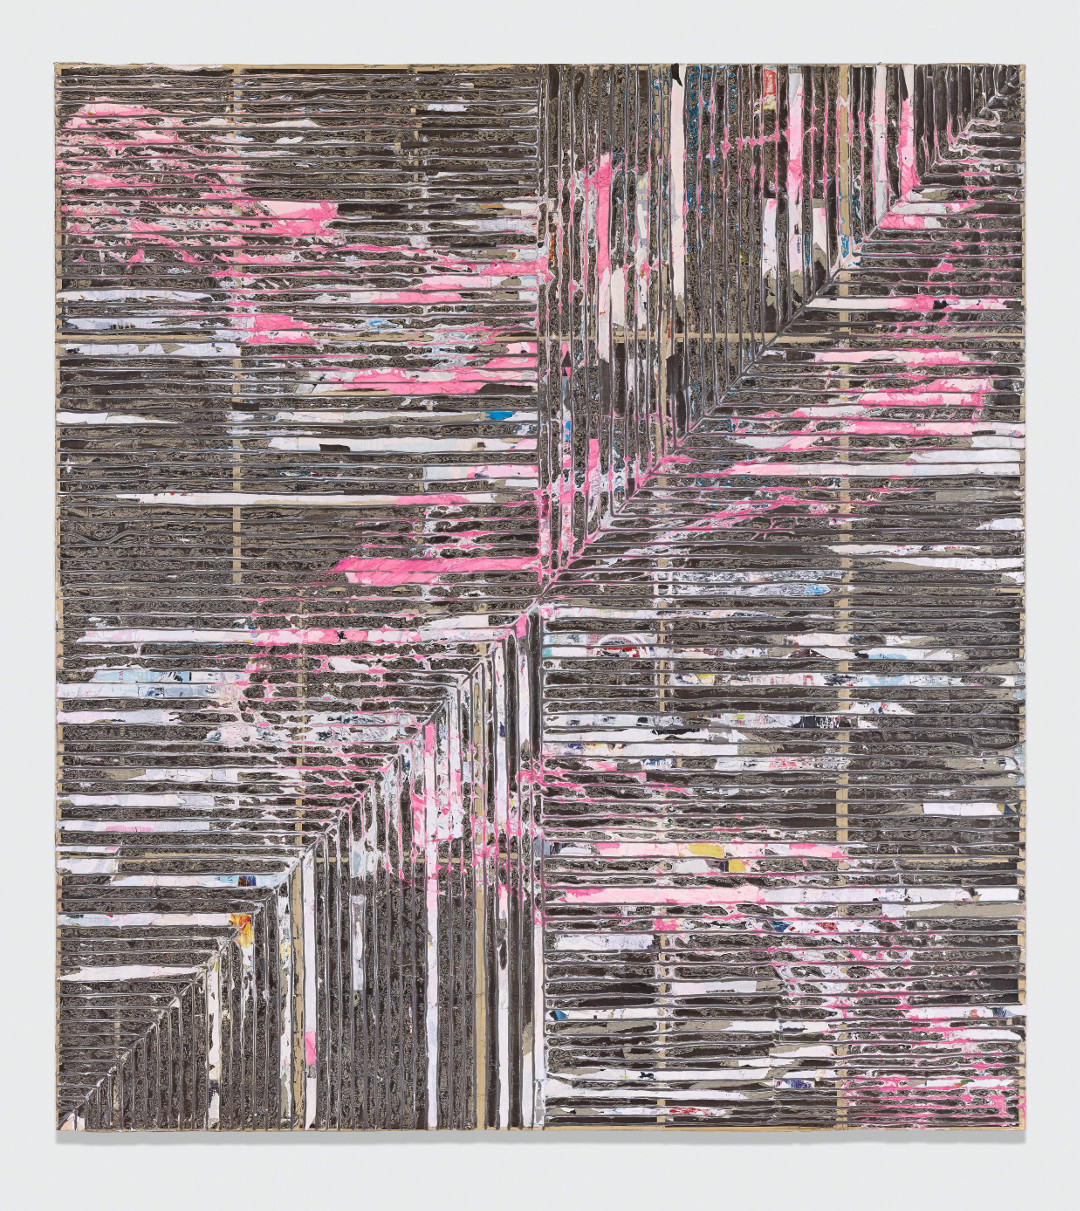 Mark Bradford, Crack Between the Floorboards, 2014. Mixed-media collage on canvas, 132 1/8 x 120 ¼ x 2 1/8 in. (335.5 x 305.5 x 5.5 cm). Picture credit: courtesy the artist and Hauser & Wirth, © Mark Bradford; photo: Joshua White